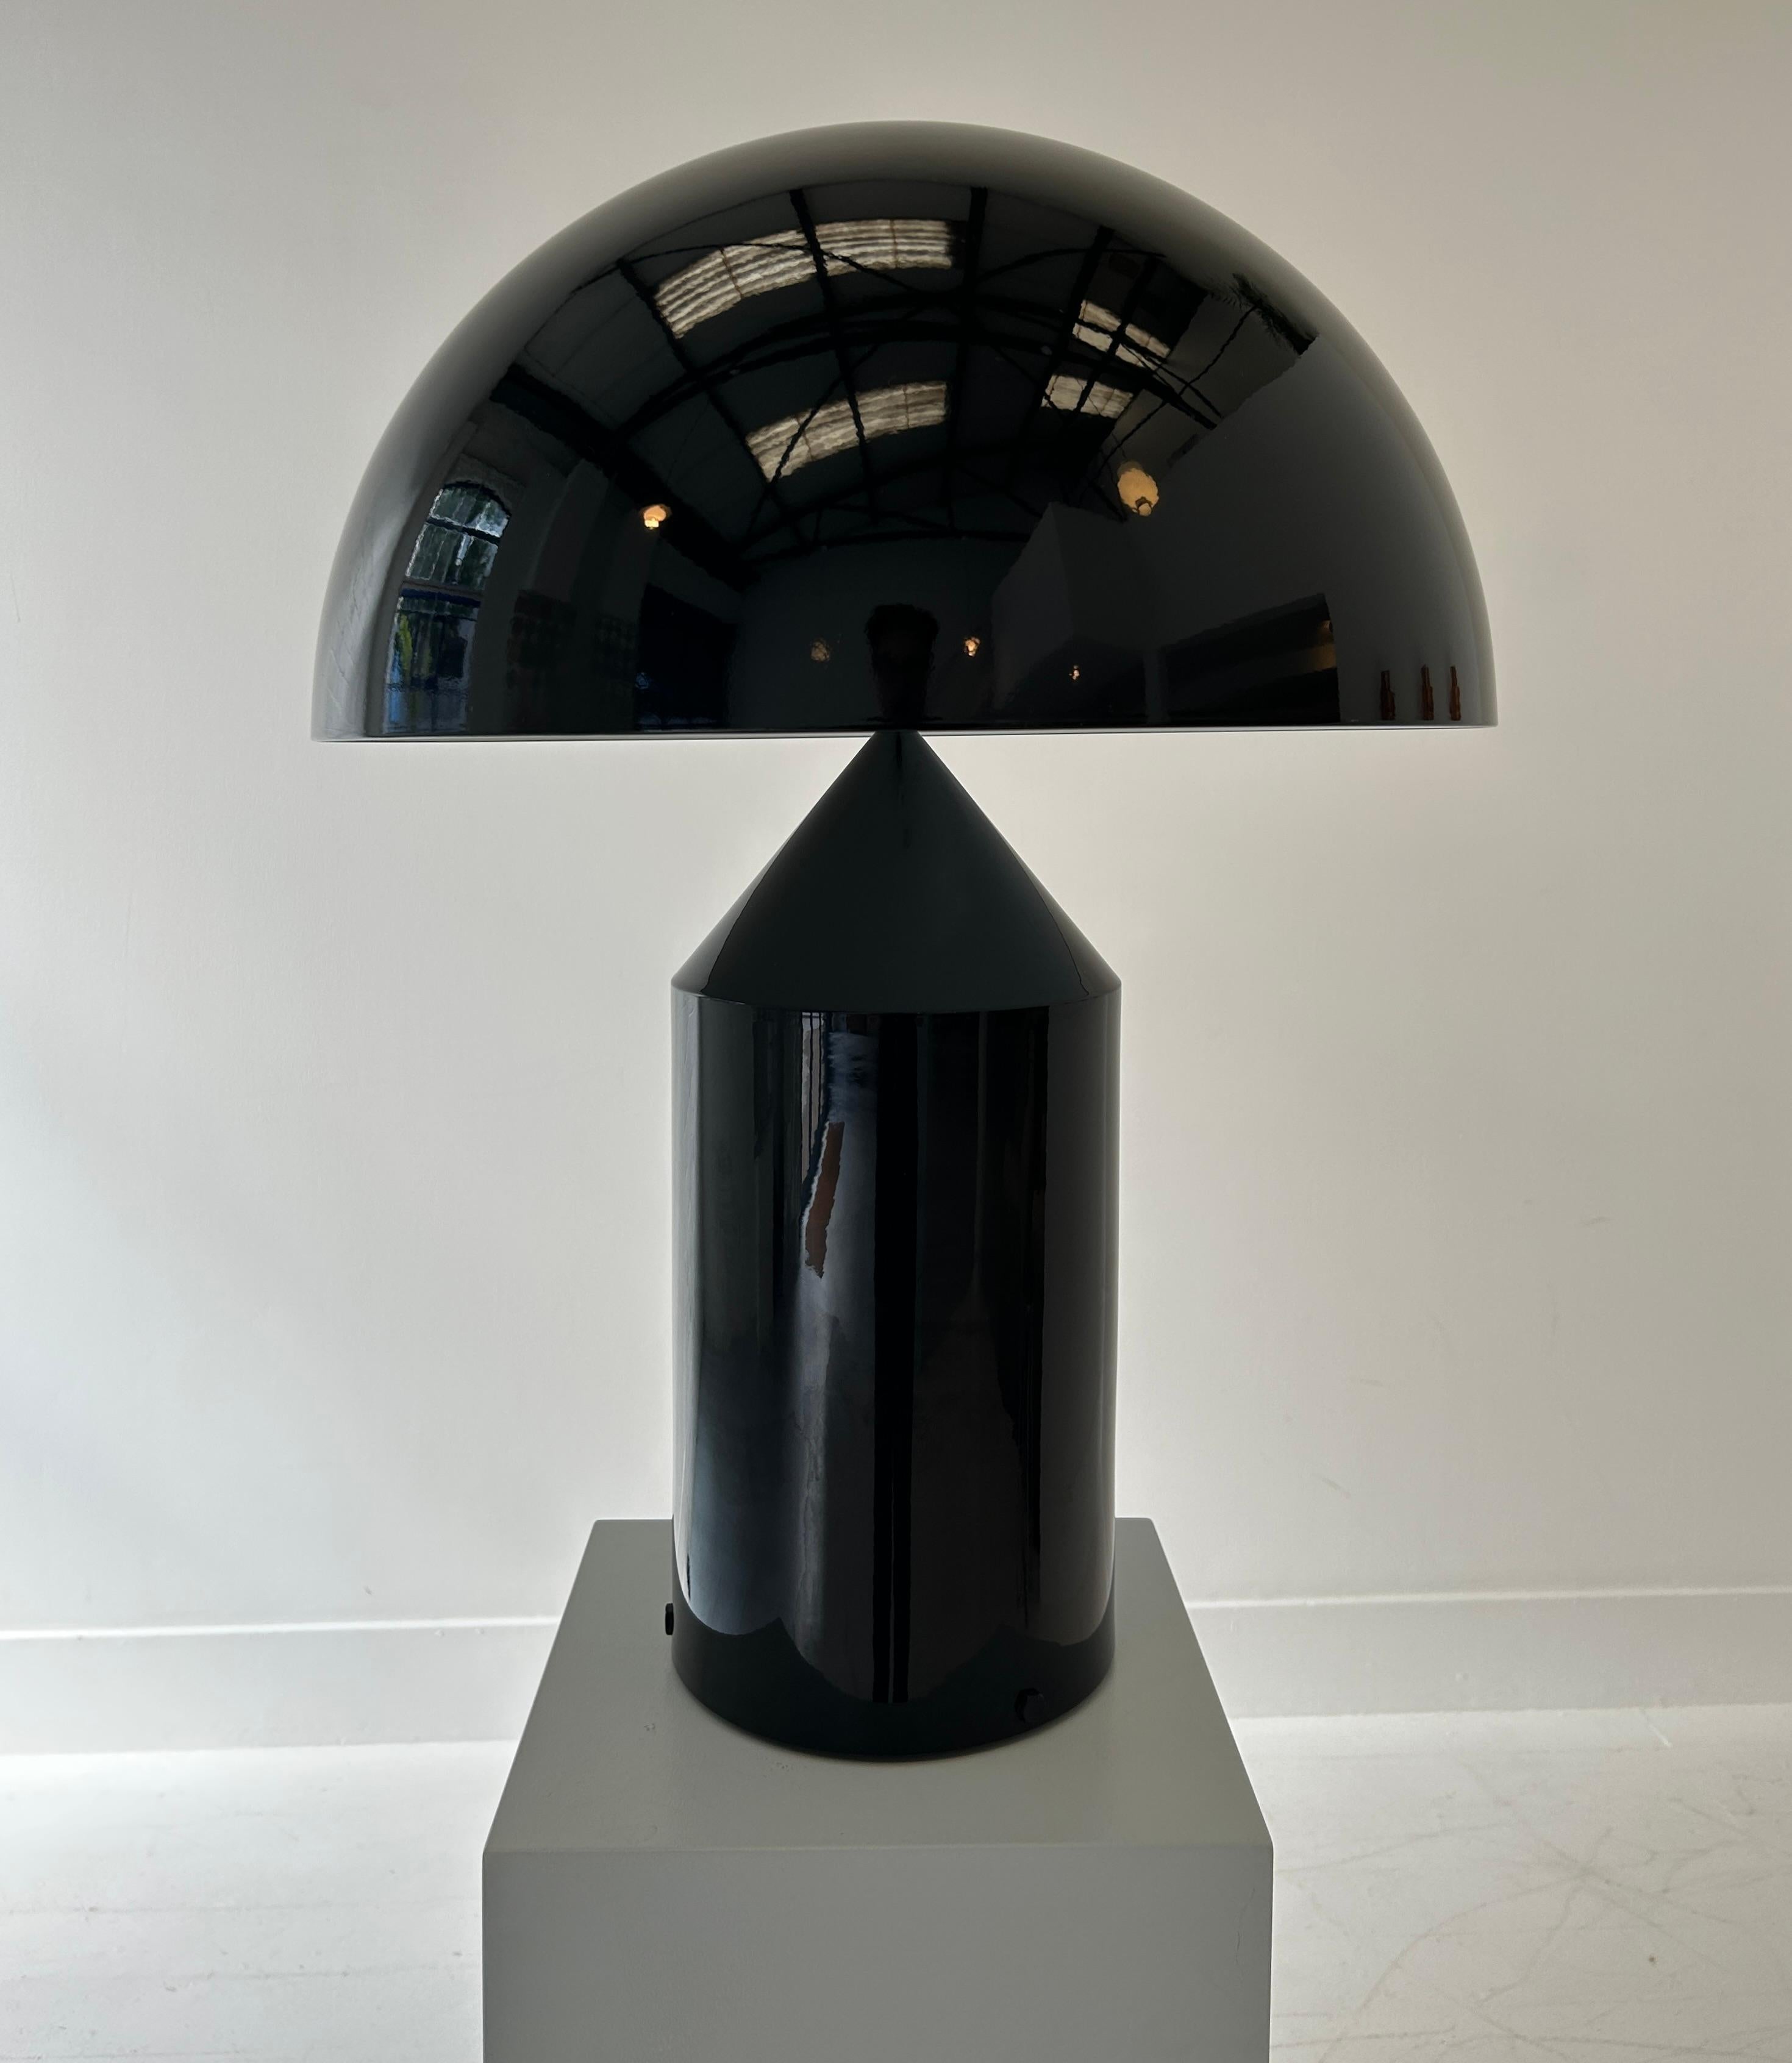 The archetypal table lamp, this is an example of an early edition of the Atollo lamp, finished in high gloss black aluminium. 

The classic design is known universally for its simplistic elegance, and its robust utility. Conceived originally in 1977